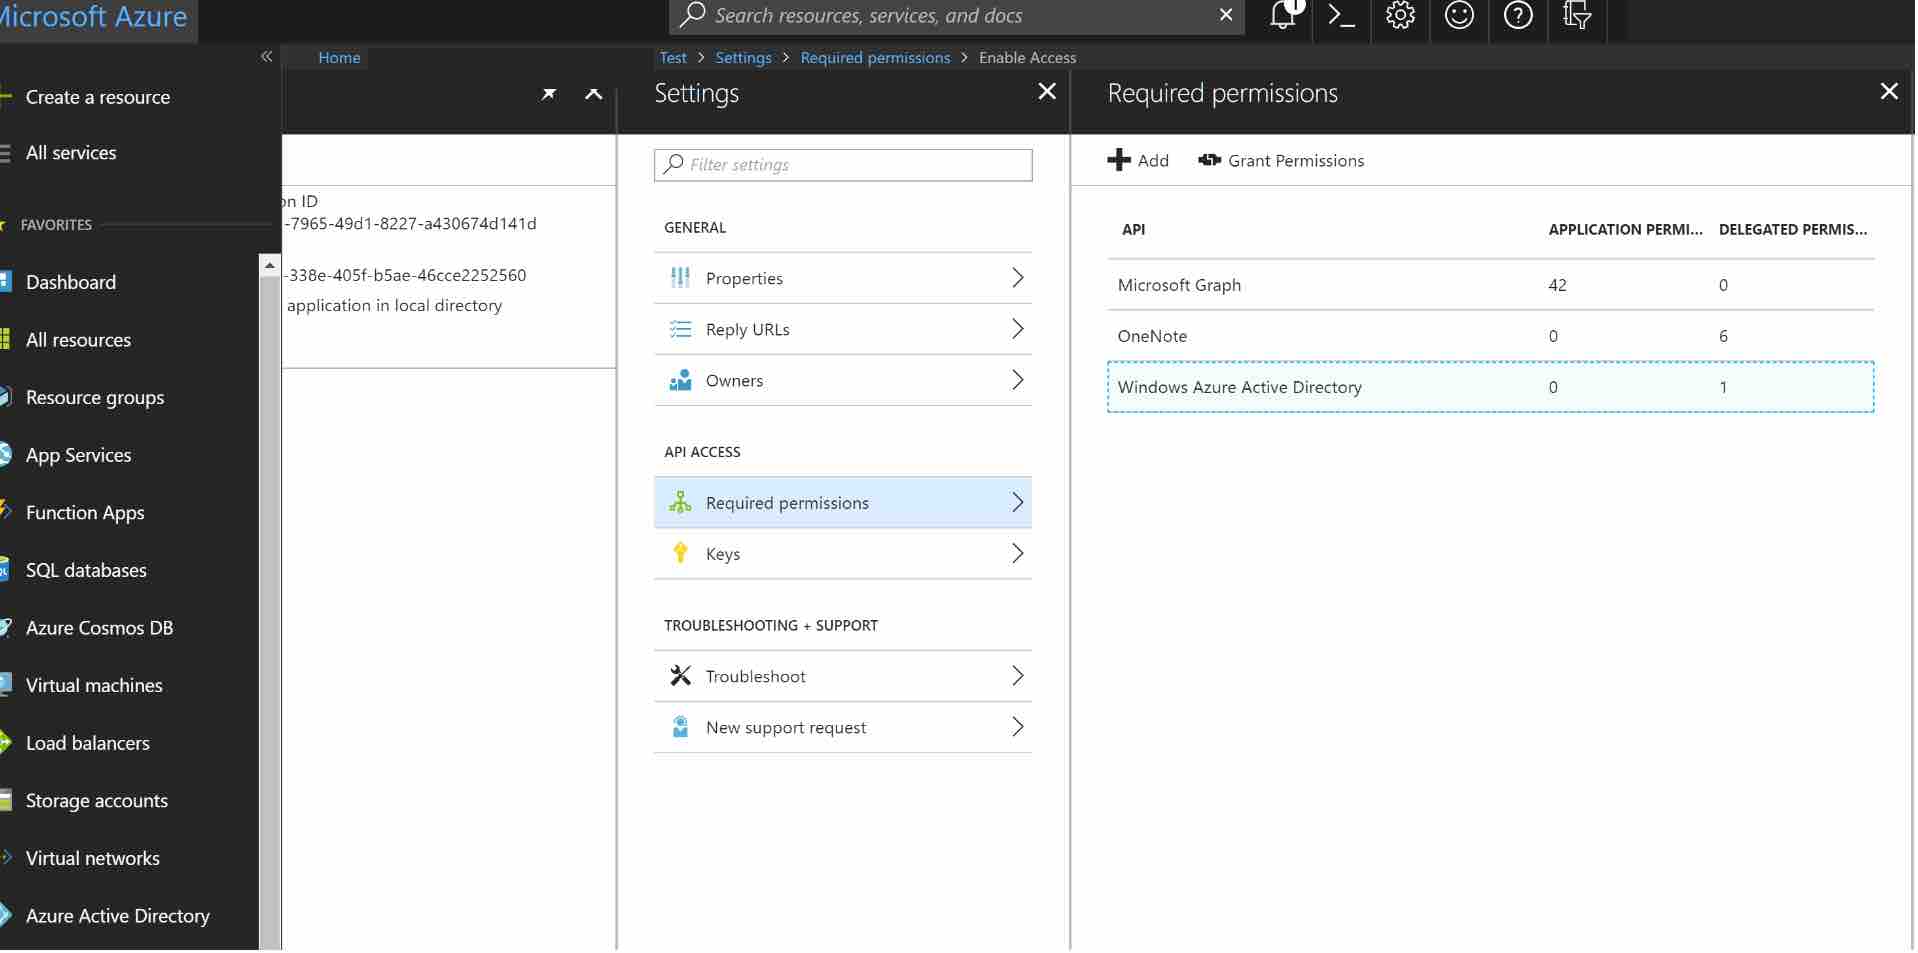 click on Windows Azure Active Directory